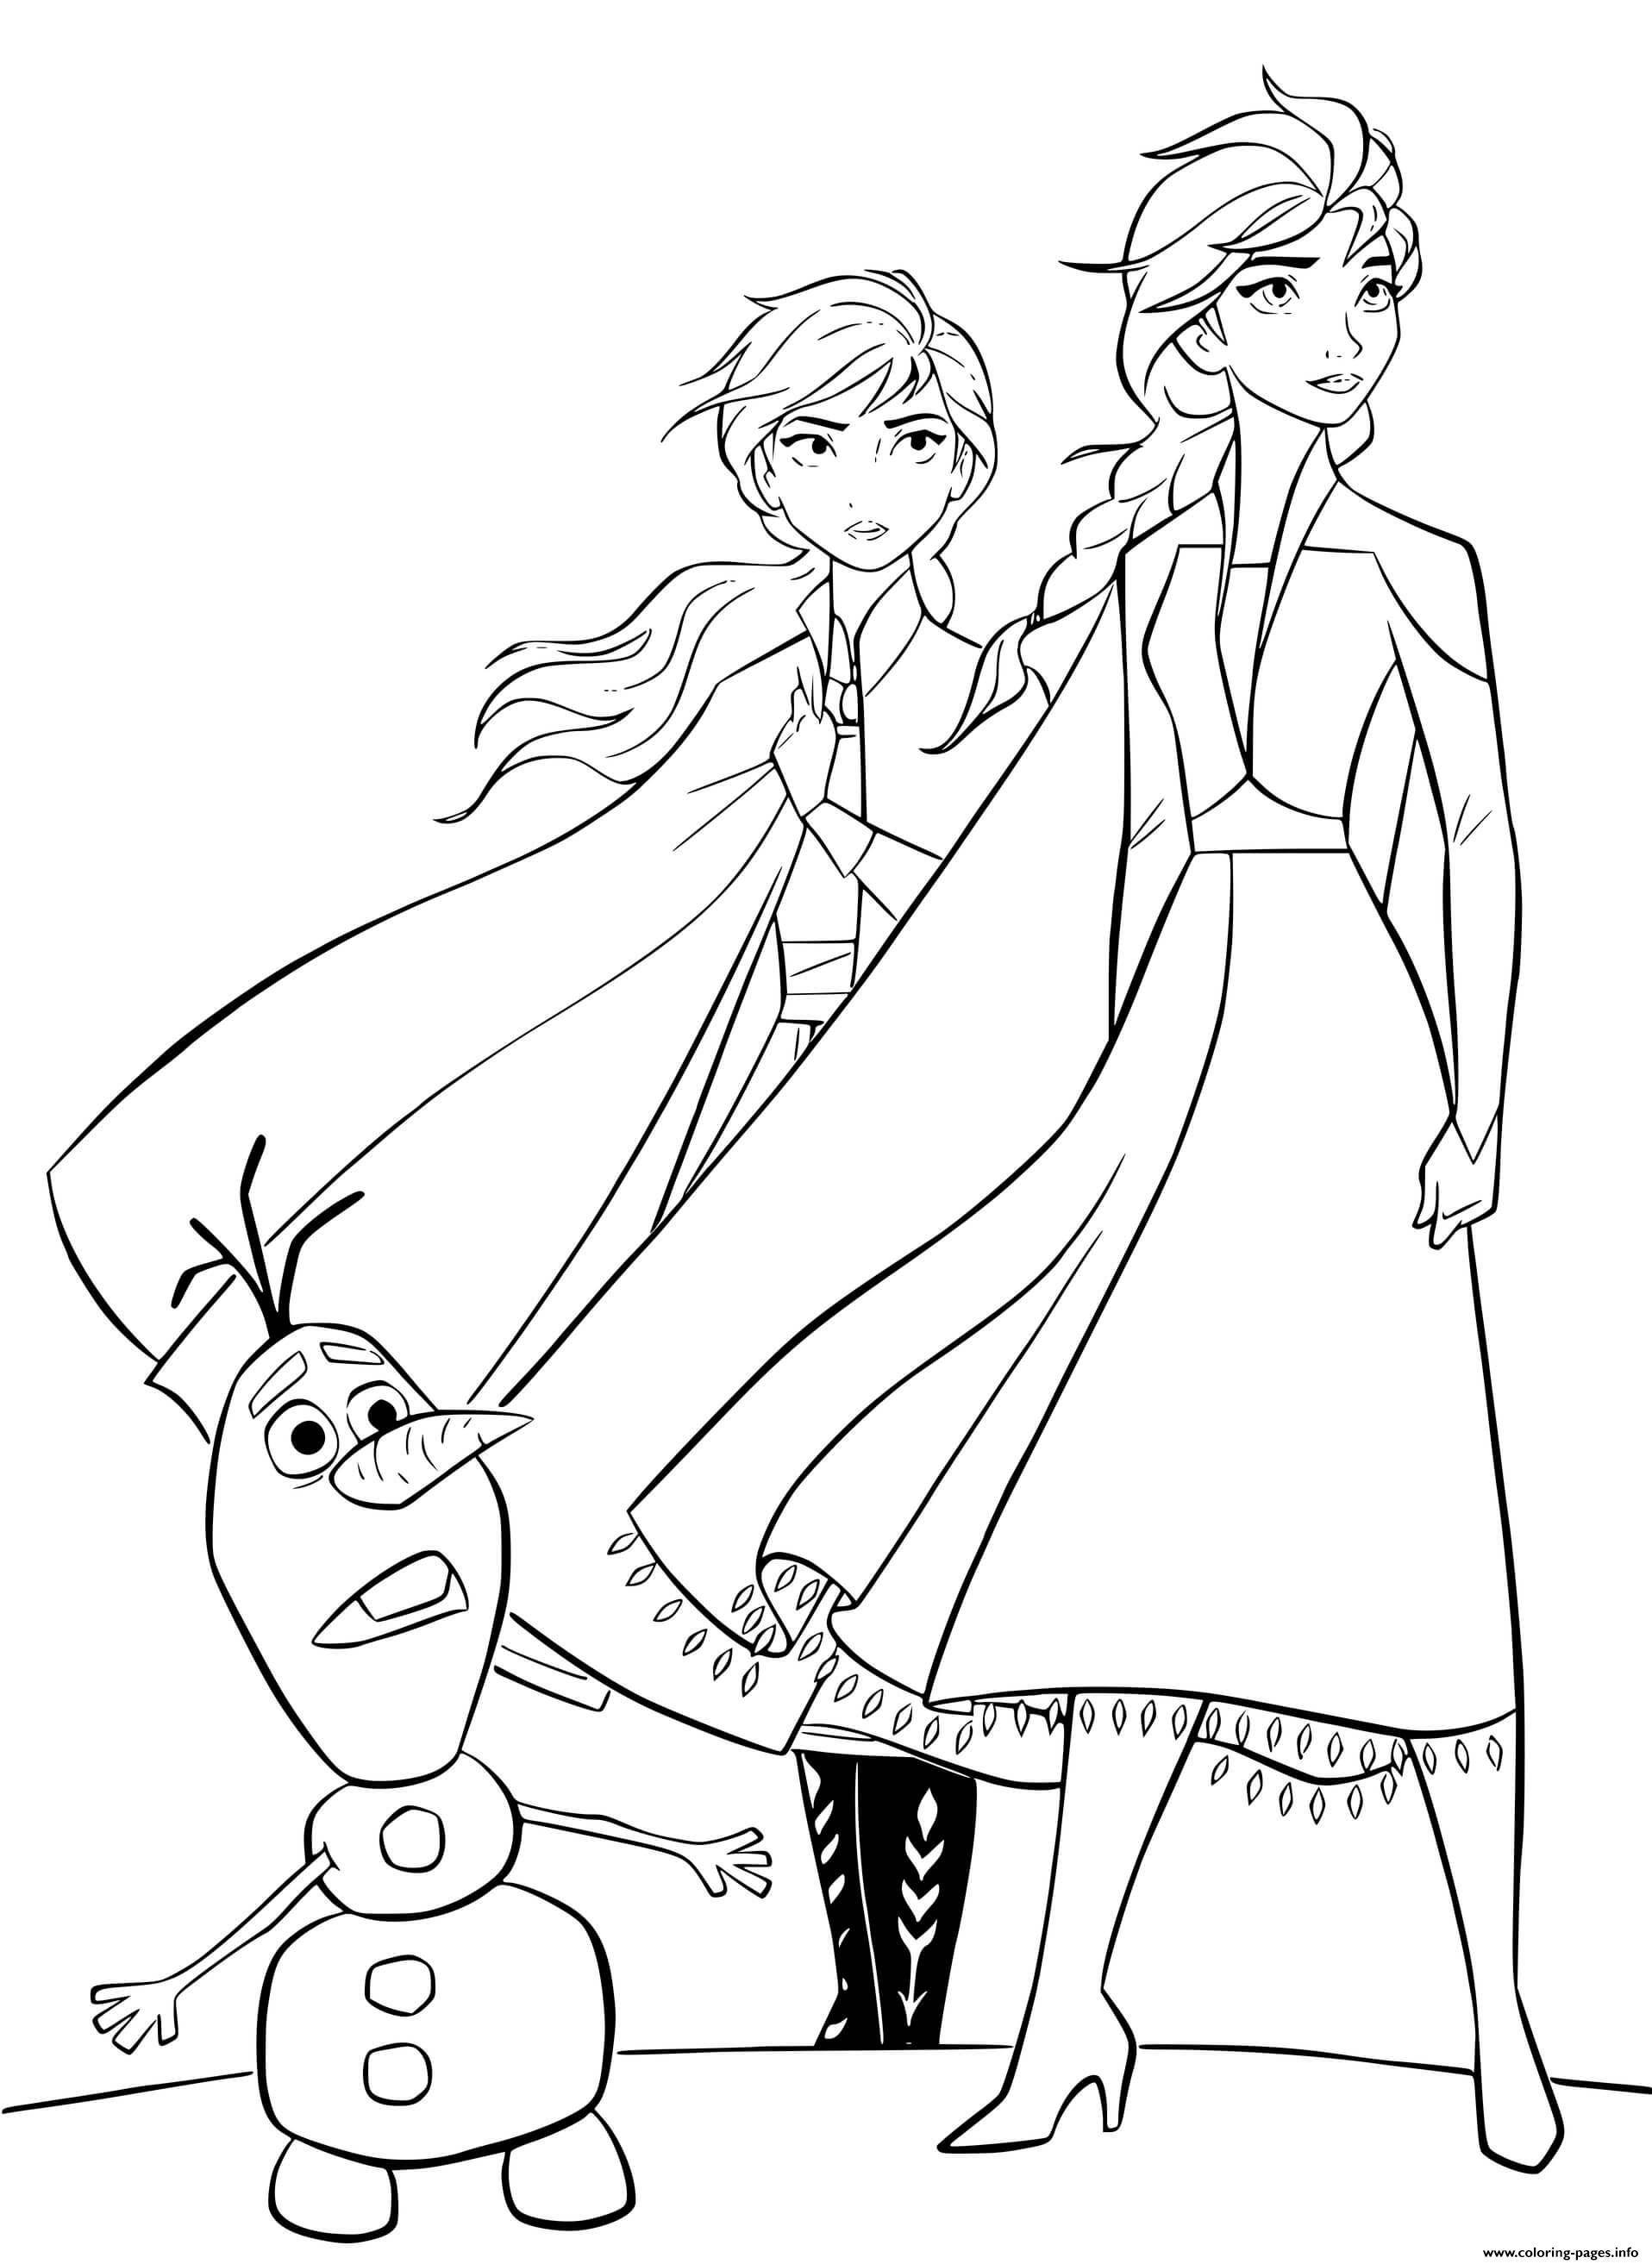 Disney Coloring Pages Elsa And Anna - 114+ Amazing SVG File